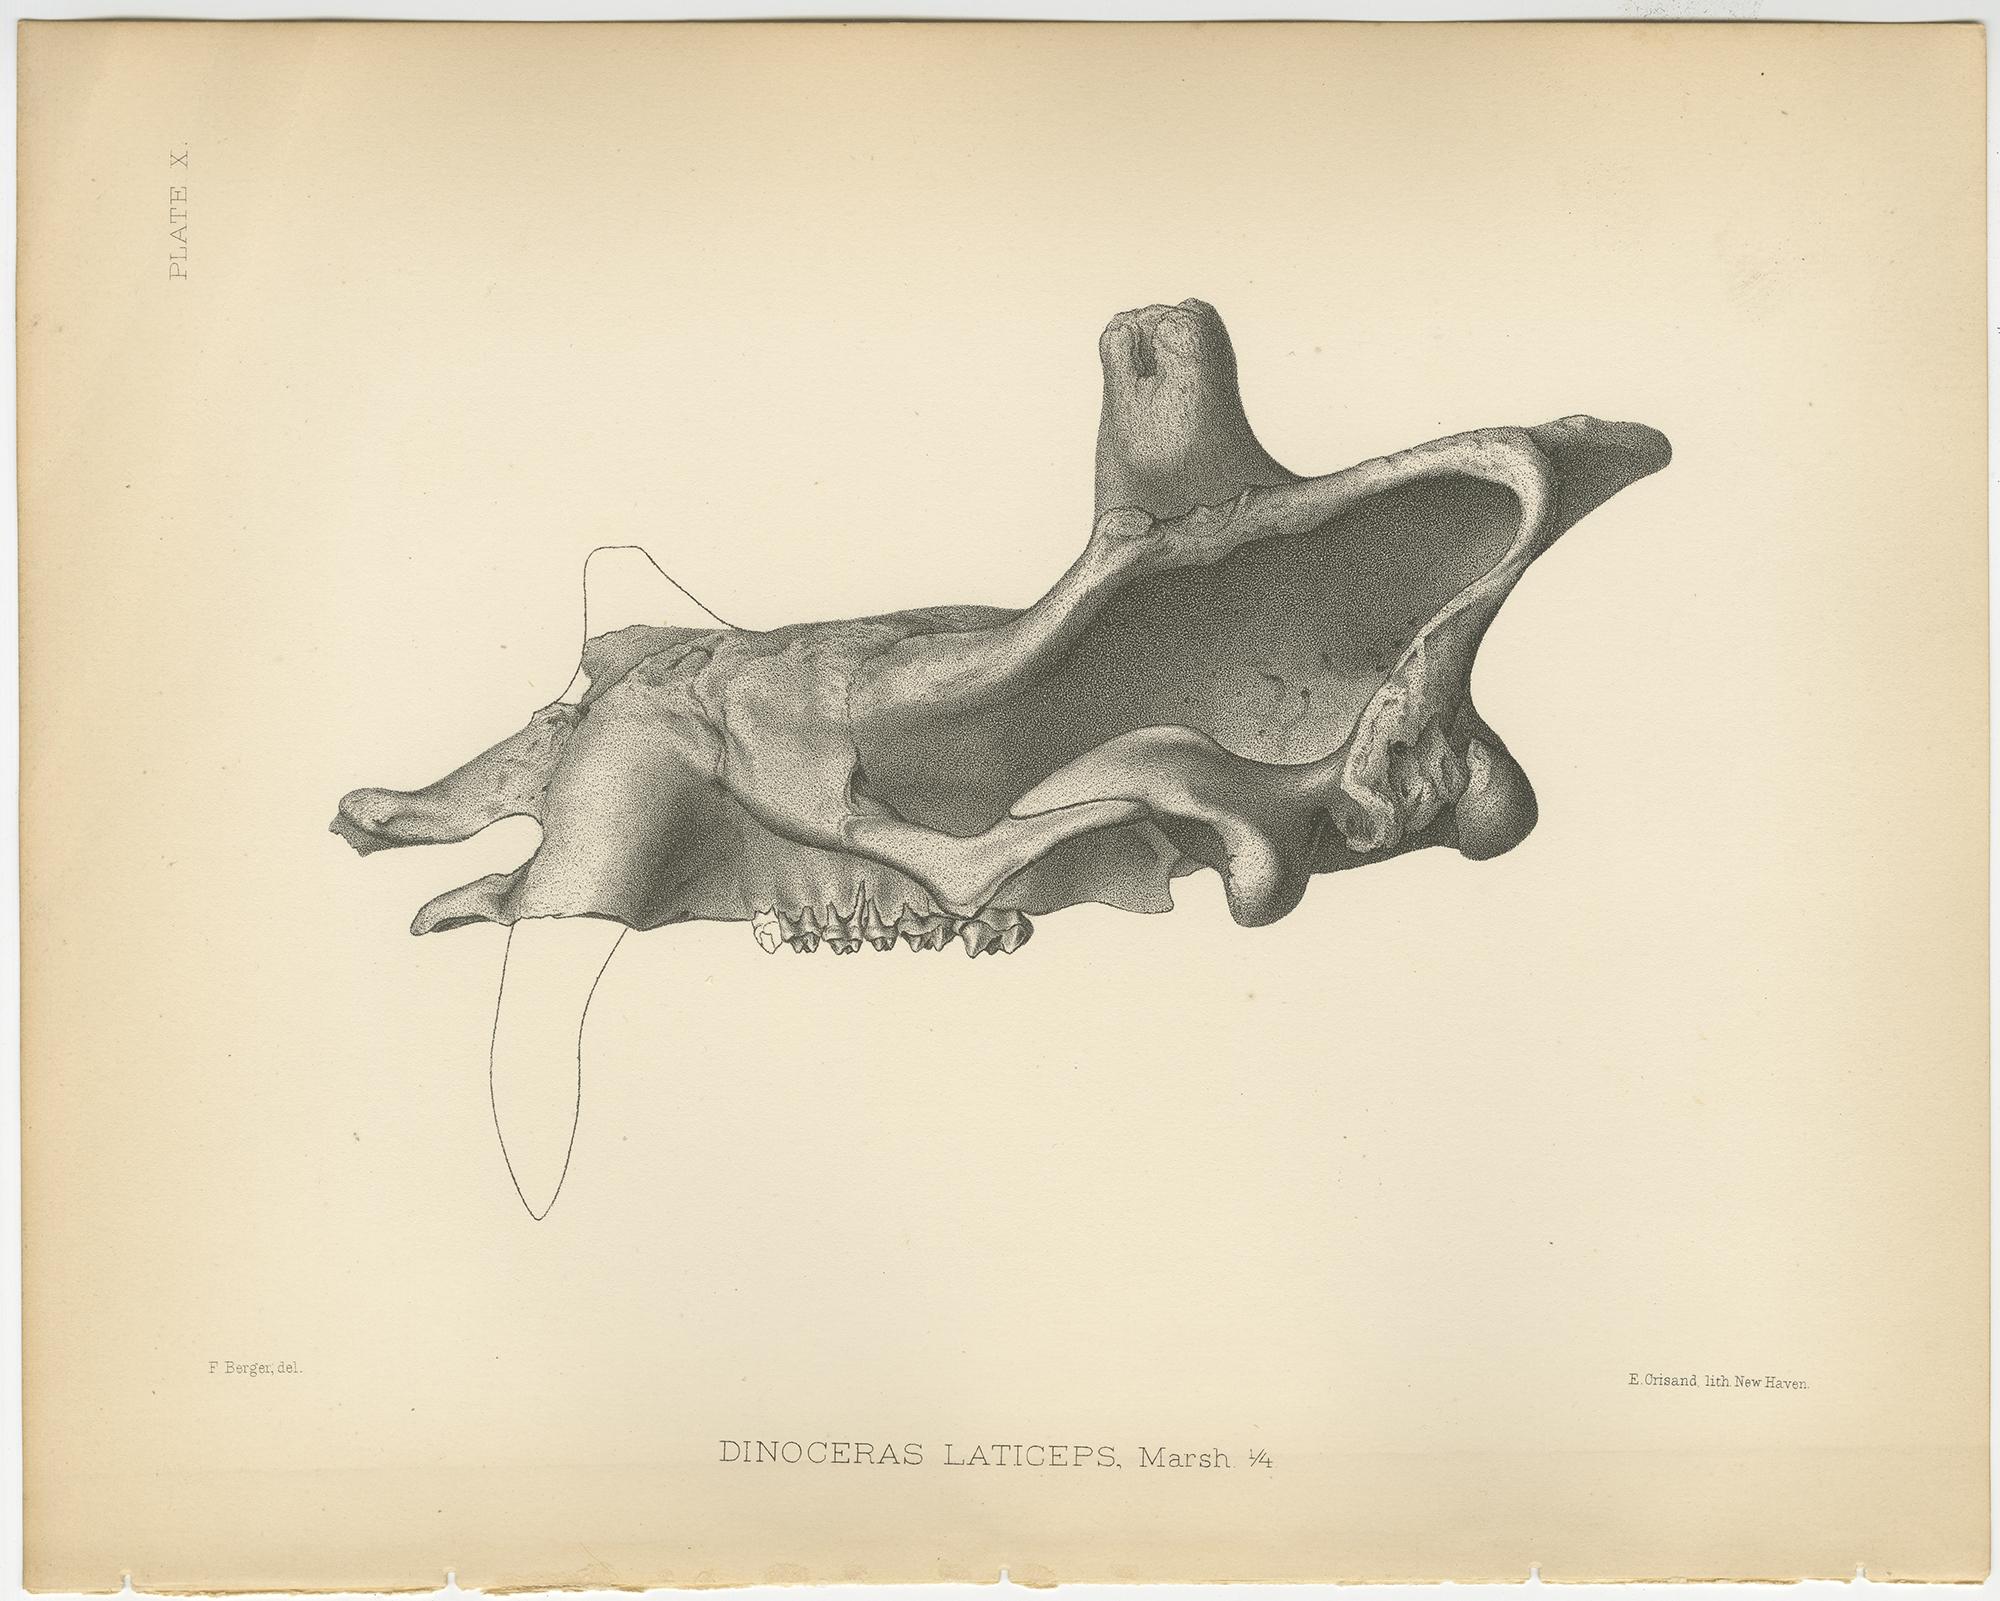 Set of three antique prints titled 'Dinoceras Laticeps'. Original lithograph of the skull of a Dinoceras Laticeps, a large extinct mammal. This print originates from volume 10 of 'Monographs of the United States Geological Survey' by Othniel Charles